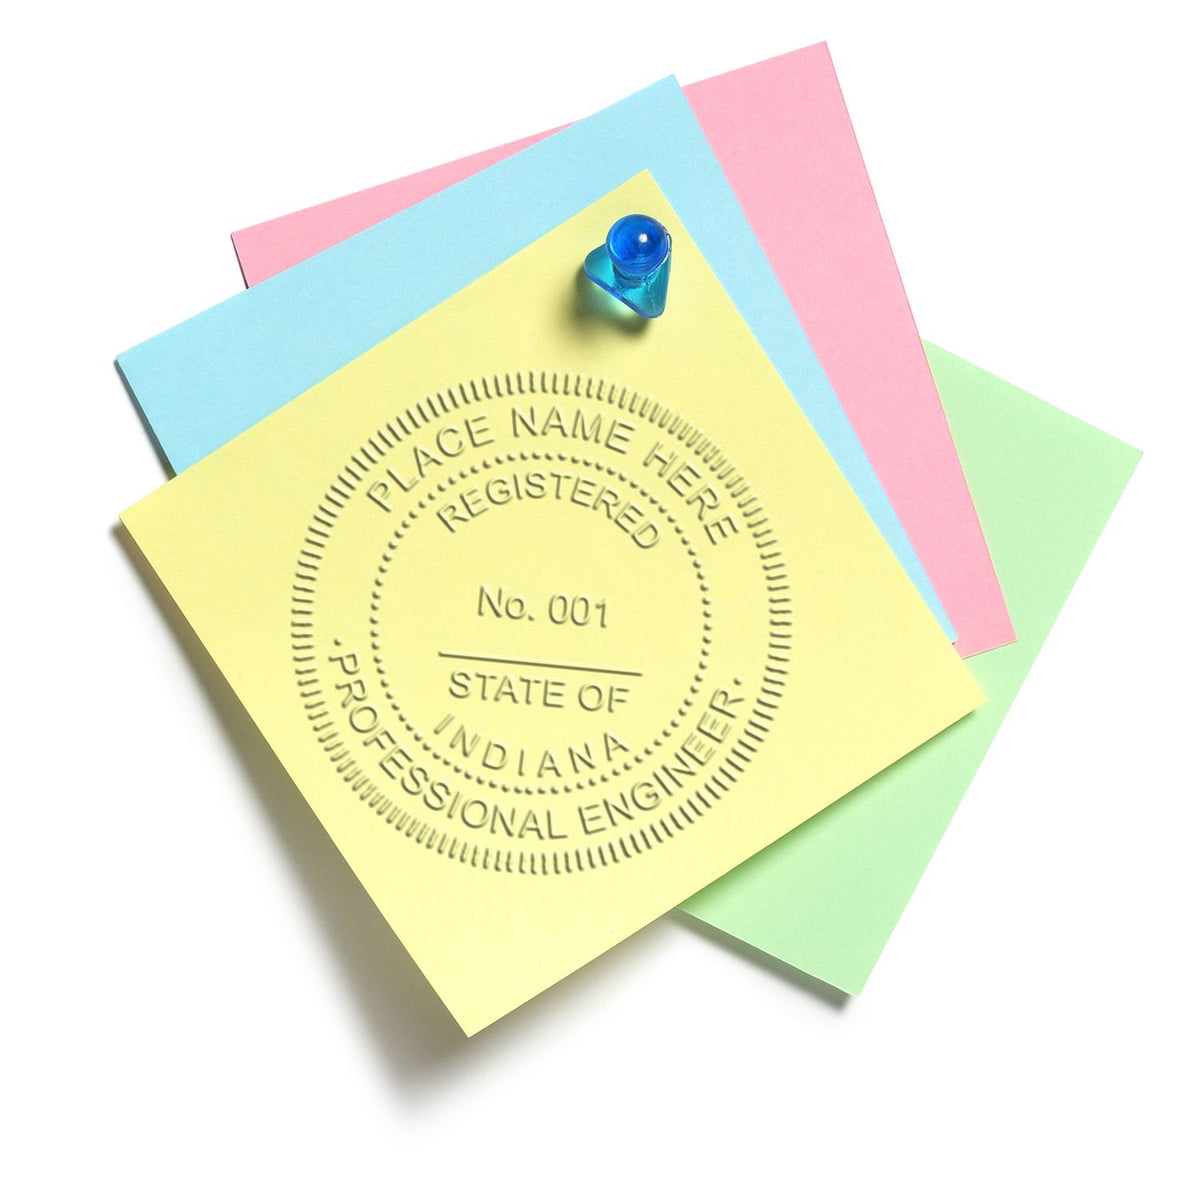 This paper is stamped with a sample imprint of the Soft Indiana Professional Engineer Seal, signifying its quality and reliability.